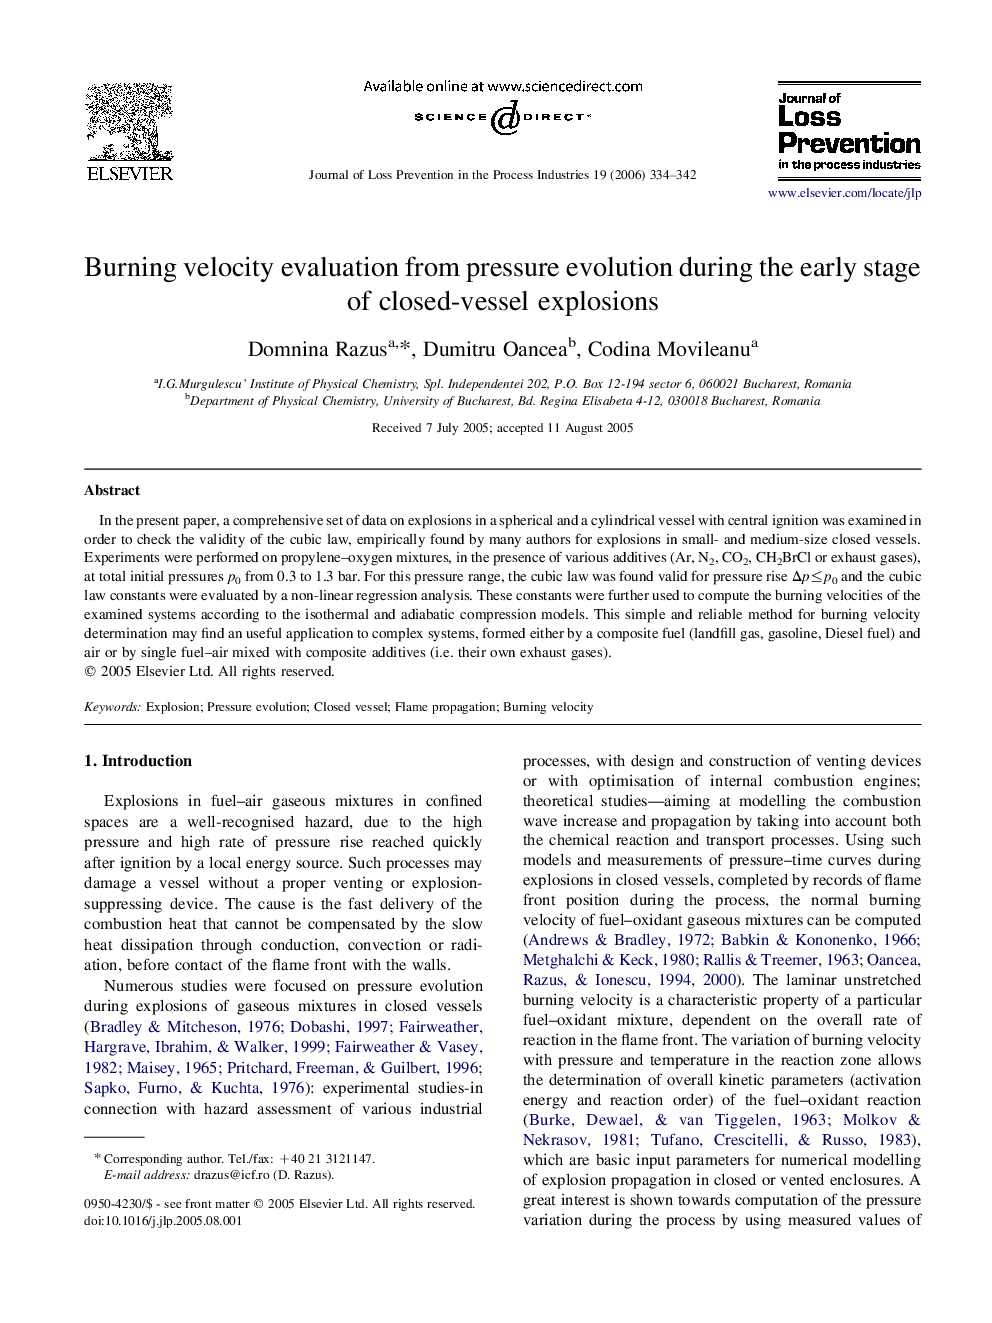 Burning velocity evaluation from pressure evolution during the early stage of closed-vessel explosions